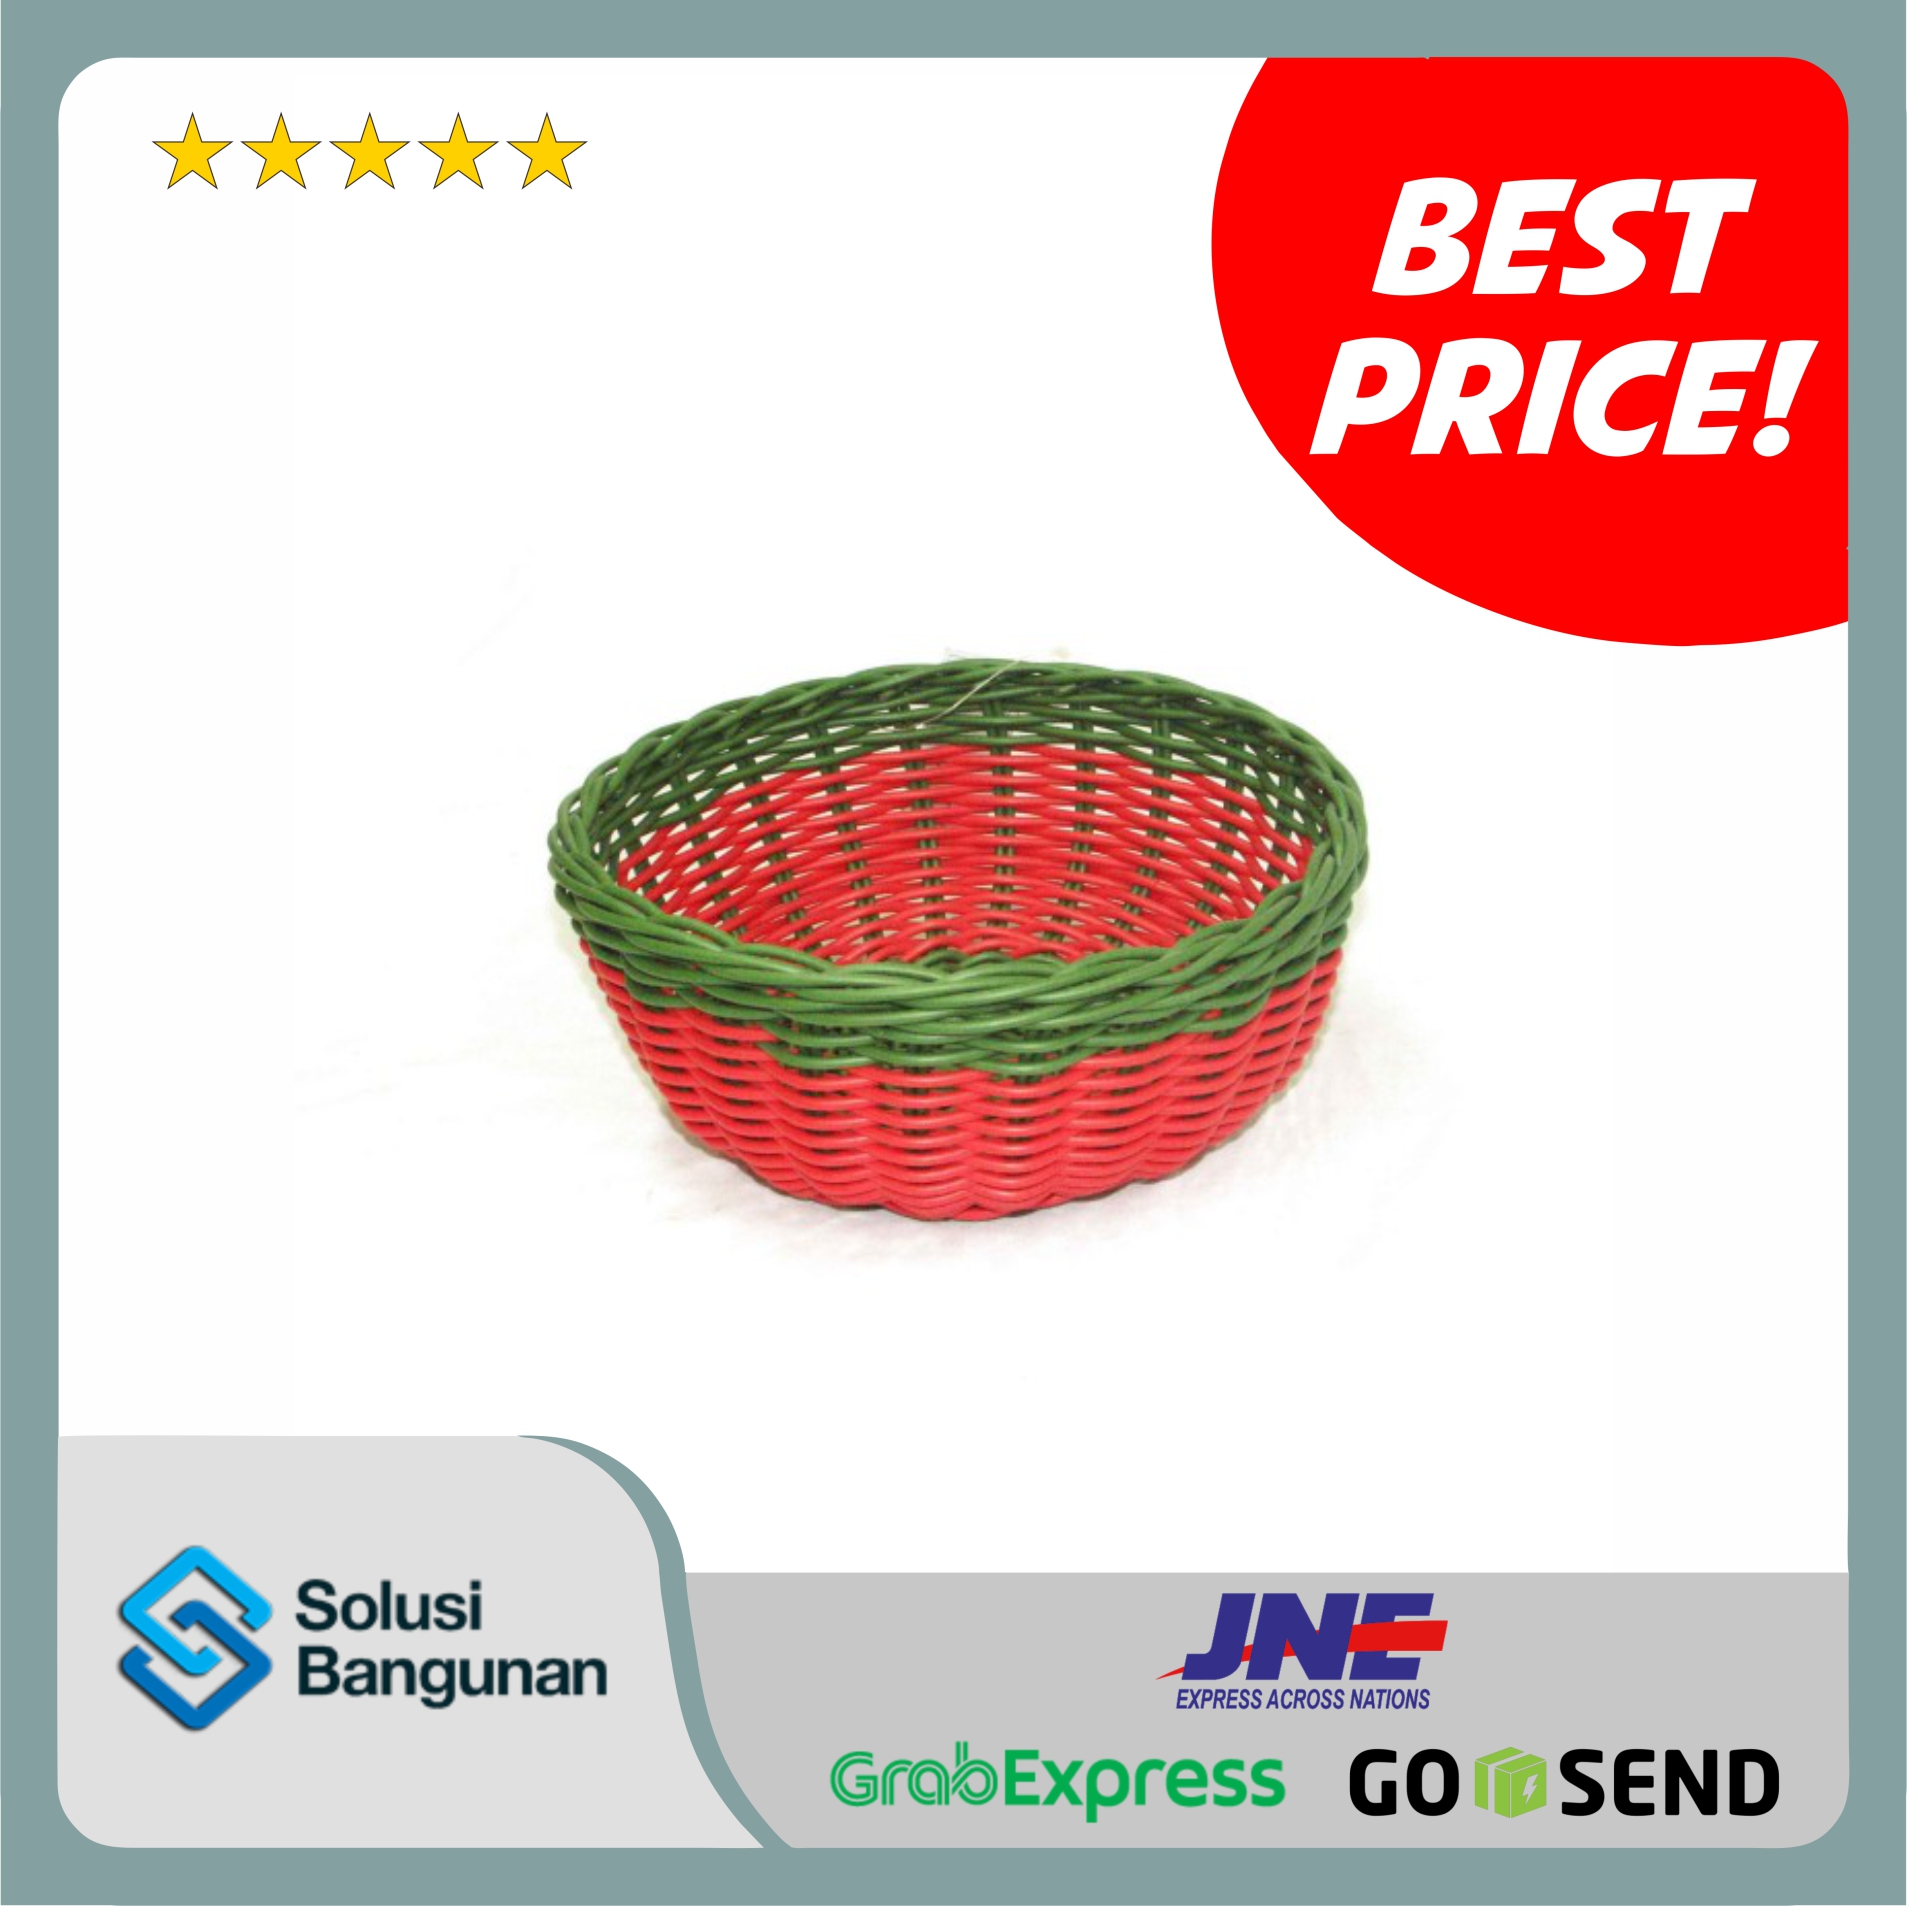 H216A2B - HC Red Green Bowl Round